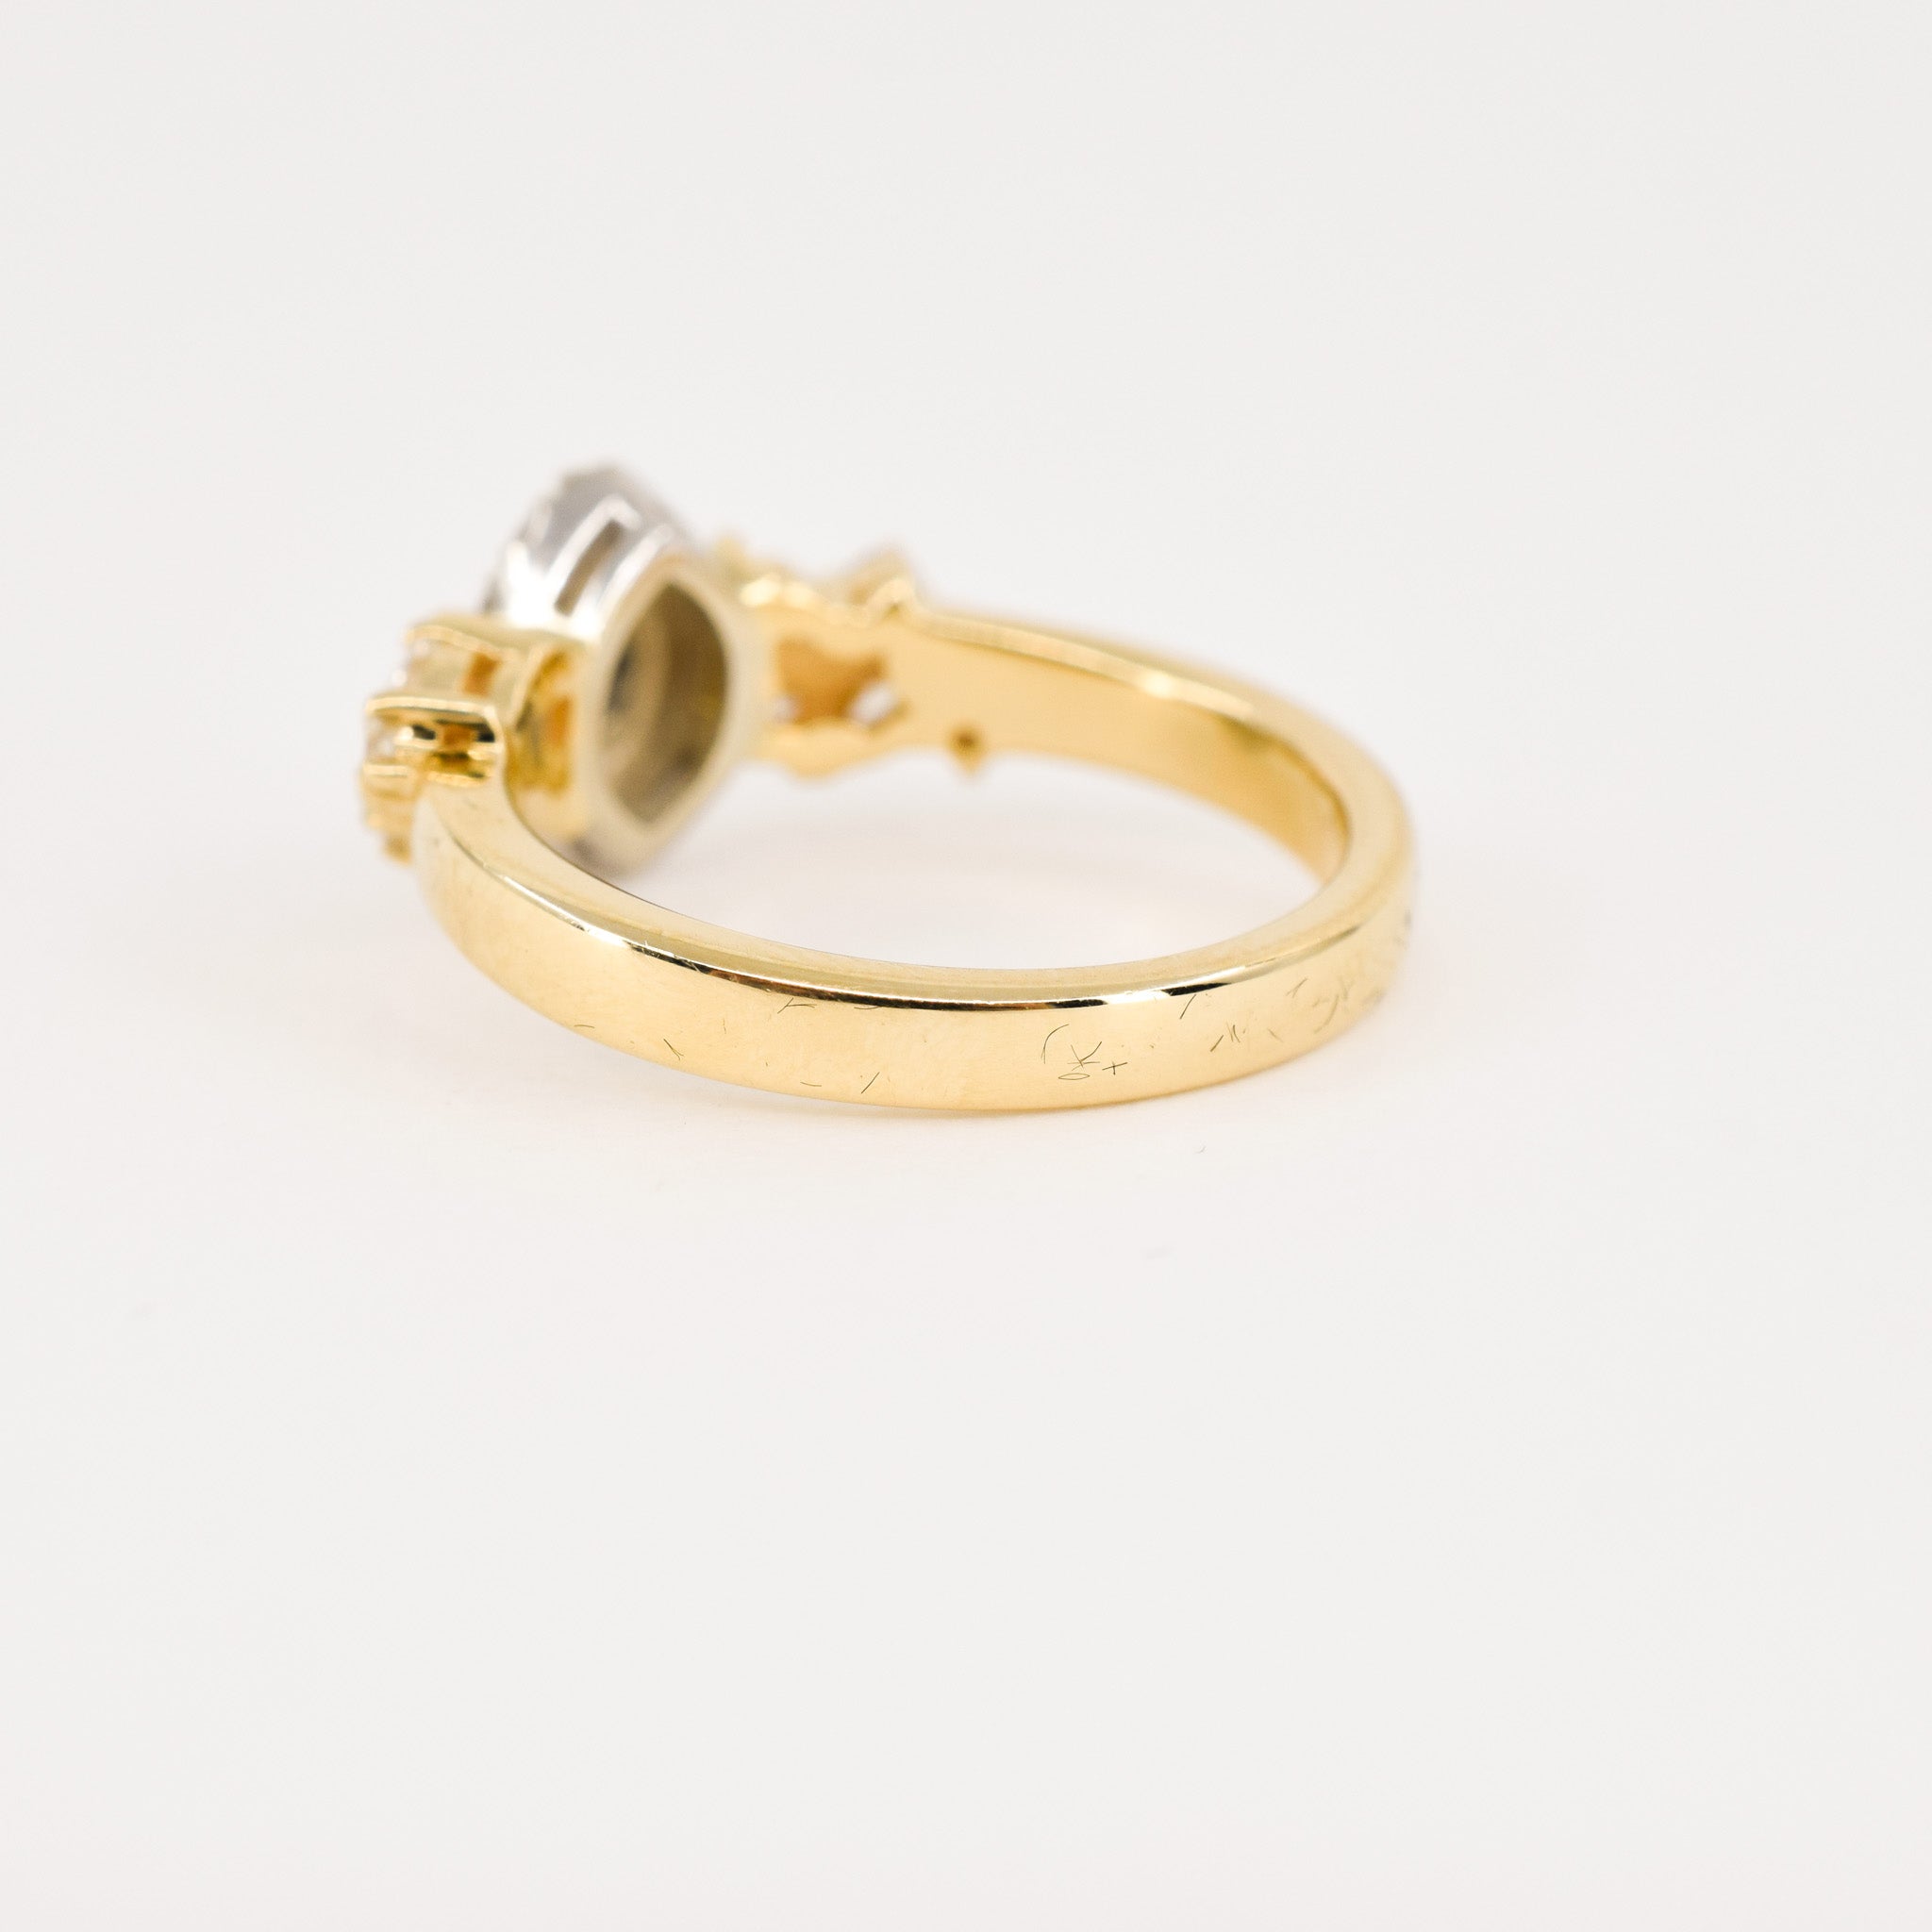 vintage gold marquise diamond engagement ring, folklor vintage and antique jewelry store canada 